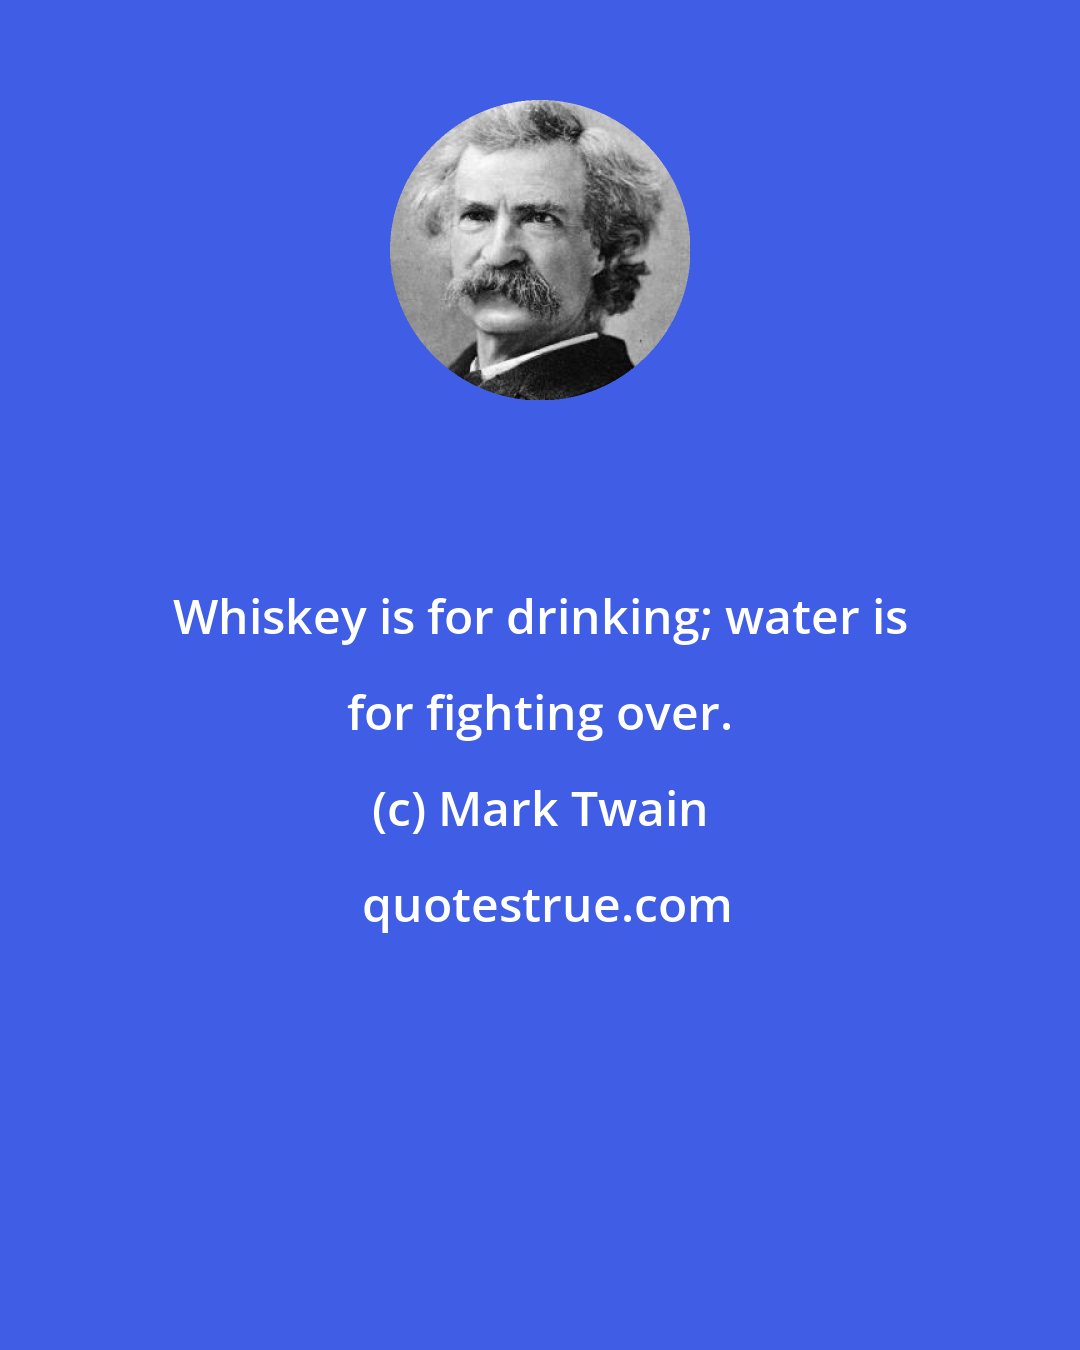 Mark Twain: Whiskey is for drinking; water is for fighting over.